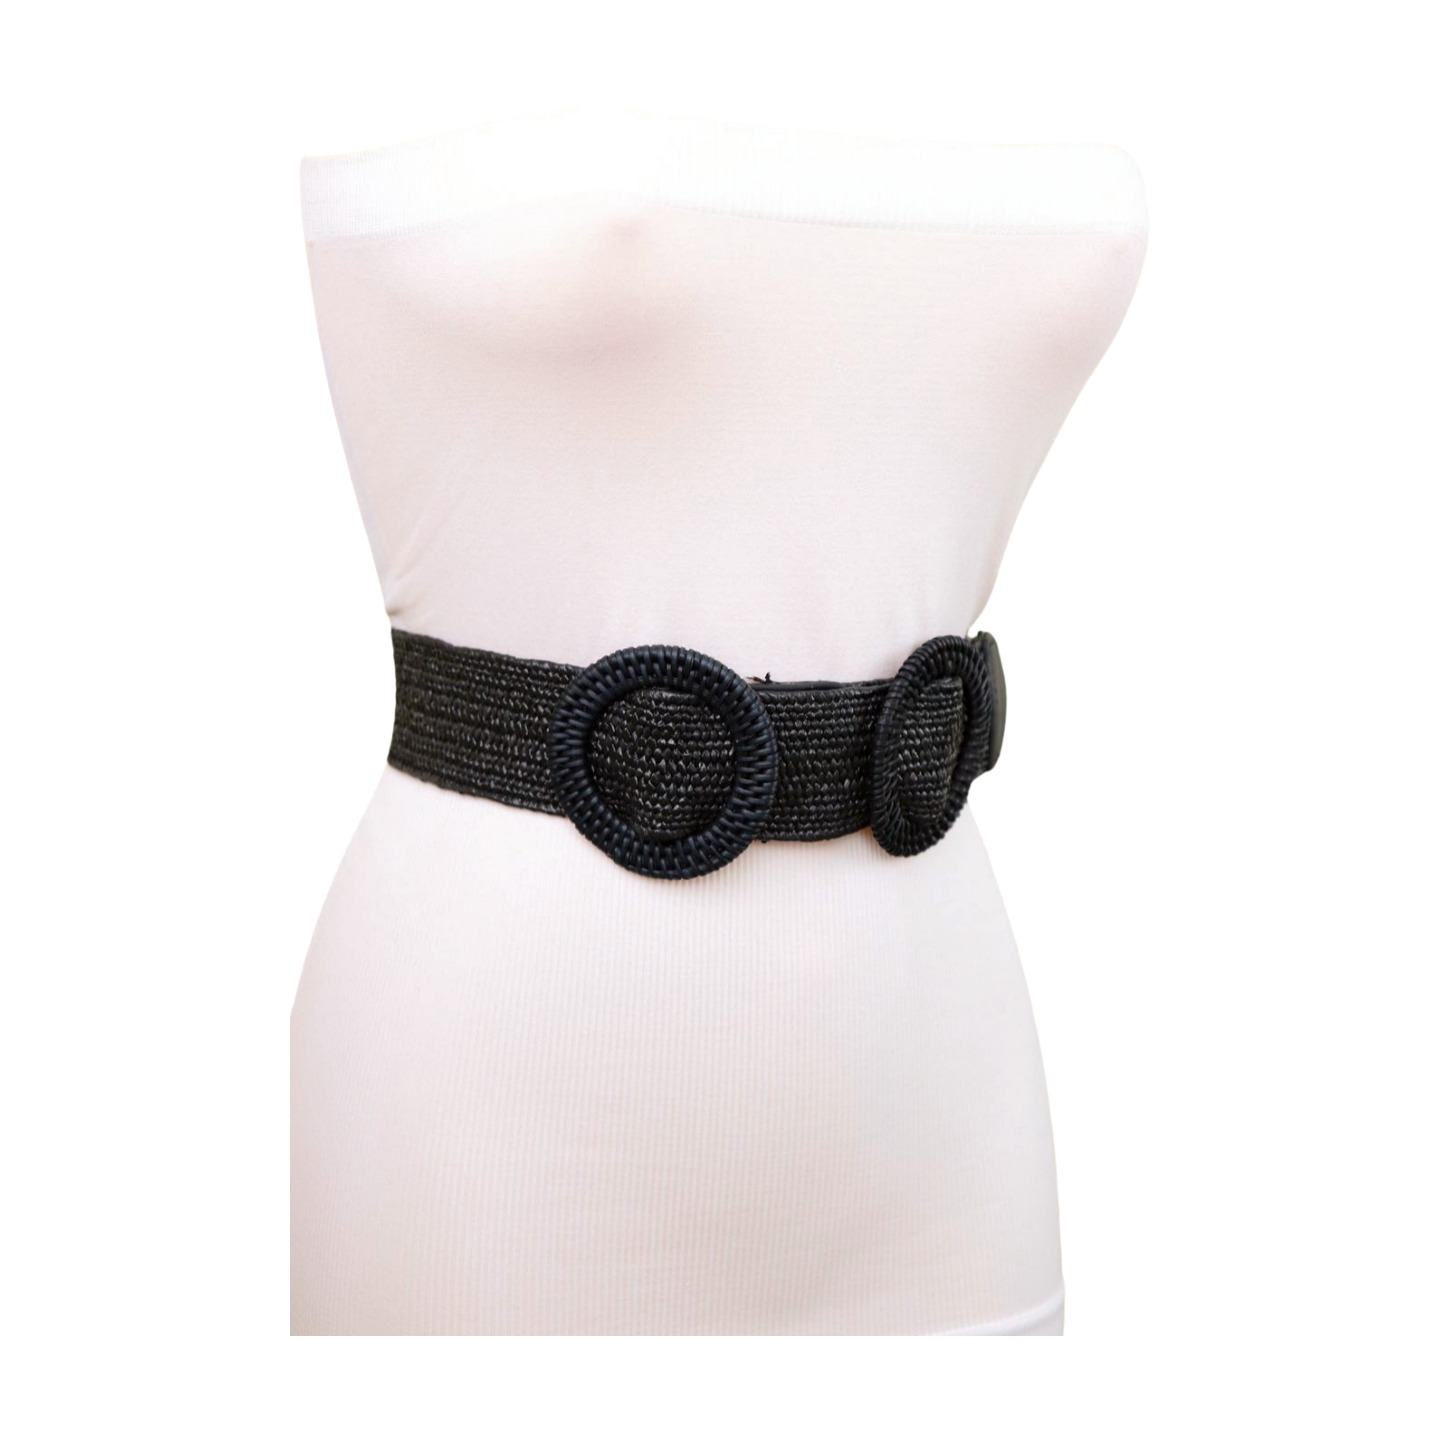 Women Black Braided Elastic Strap Fabric Belt Double Round Buckle Fit Size S M L